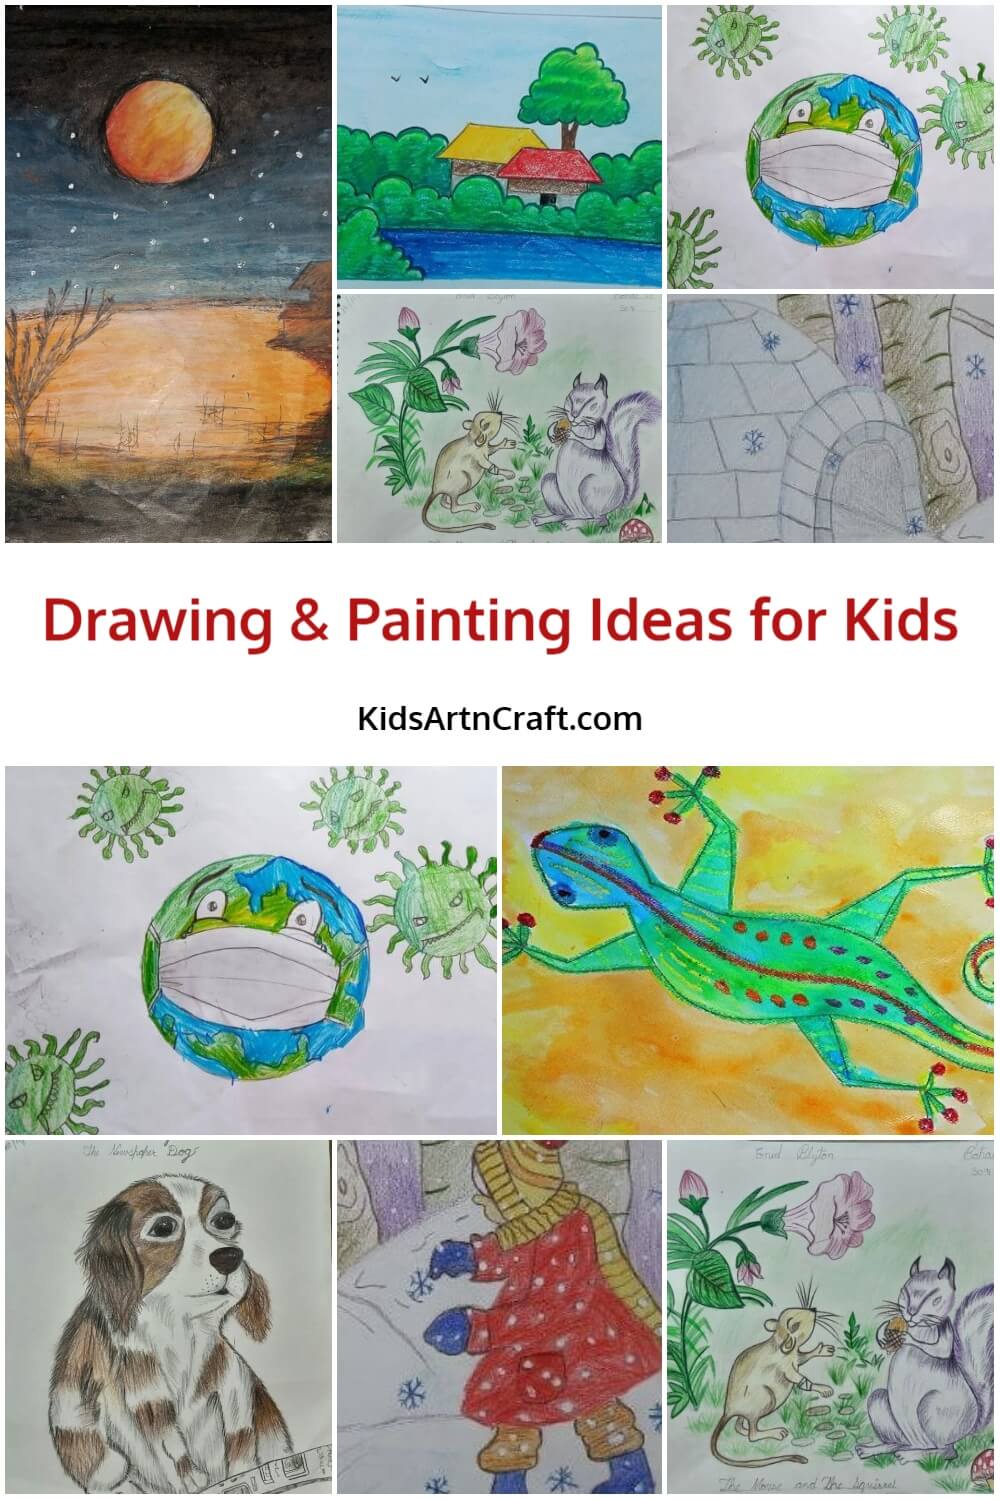 Drawing & Painting Ideas for Kids